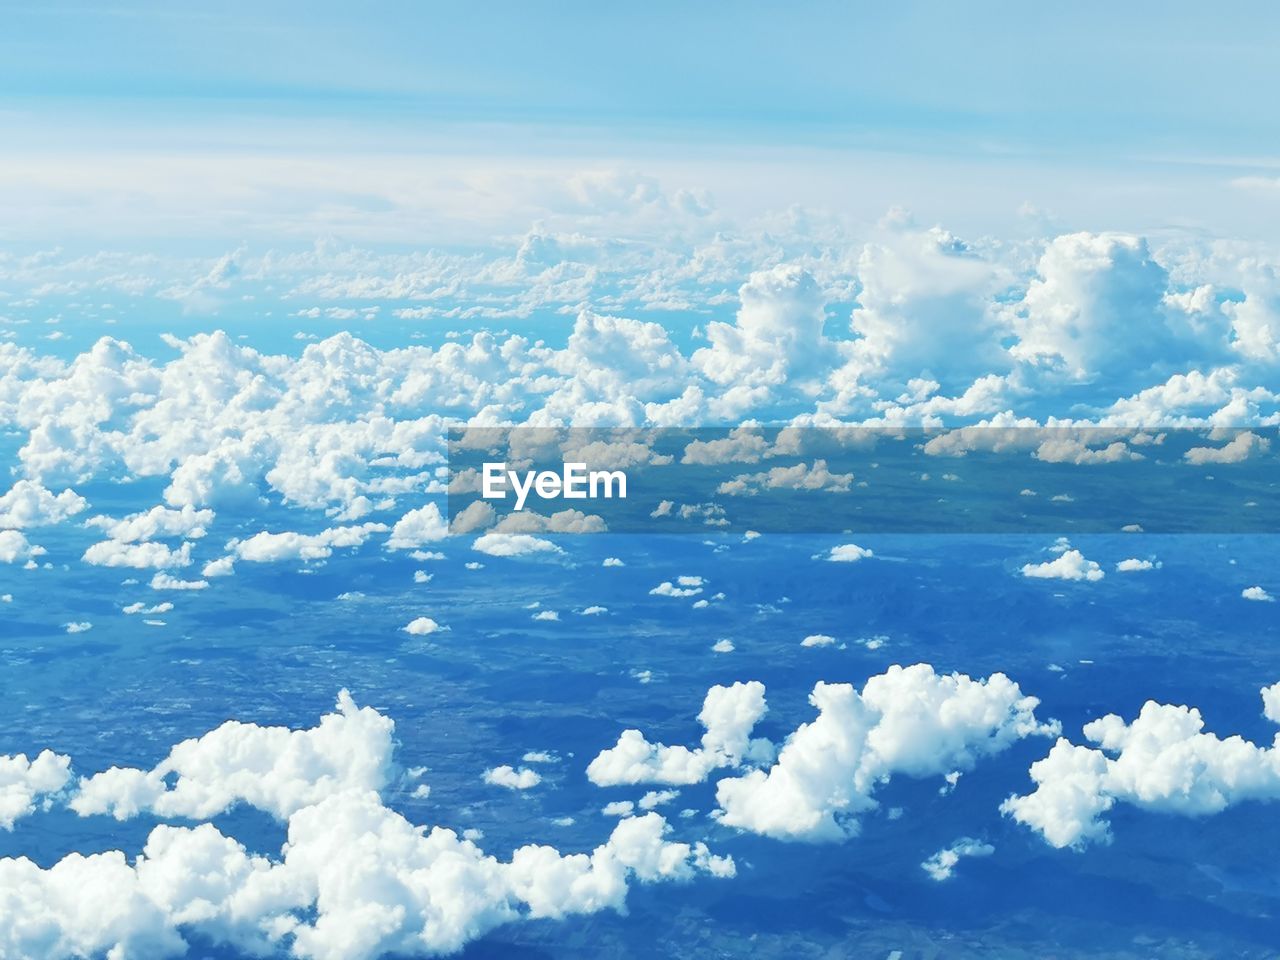 sky, cloud, environment, scenics - nature, beauty in nature, horizon, aerial view, nature, blue, landscape, cloudscape, snow, no people, idyllic, cold temperature, winter, tranquility, tranquil scene, white, airplane, mountain range, day, travel, plain, outdoors, air vehicle, water, ice, high angle view, flying, atmosphere, ice cap, backgrounds, land